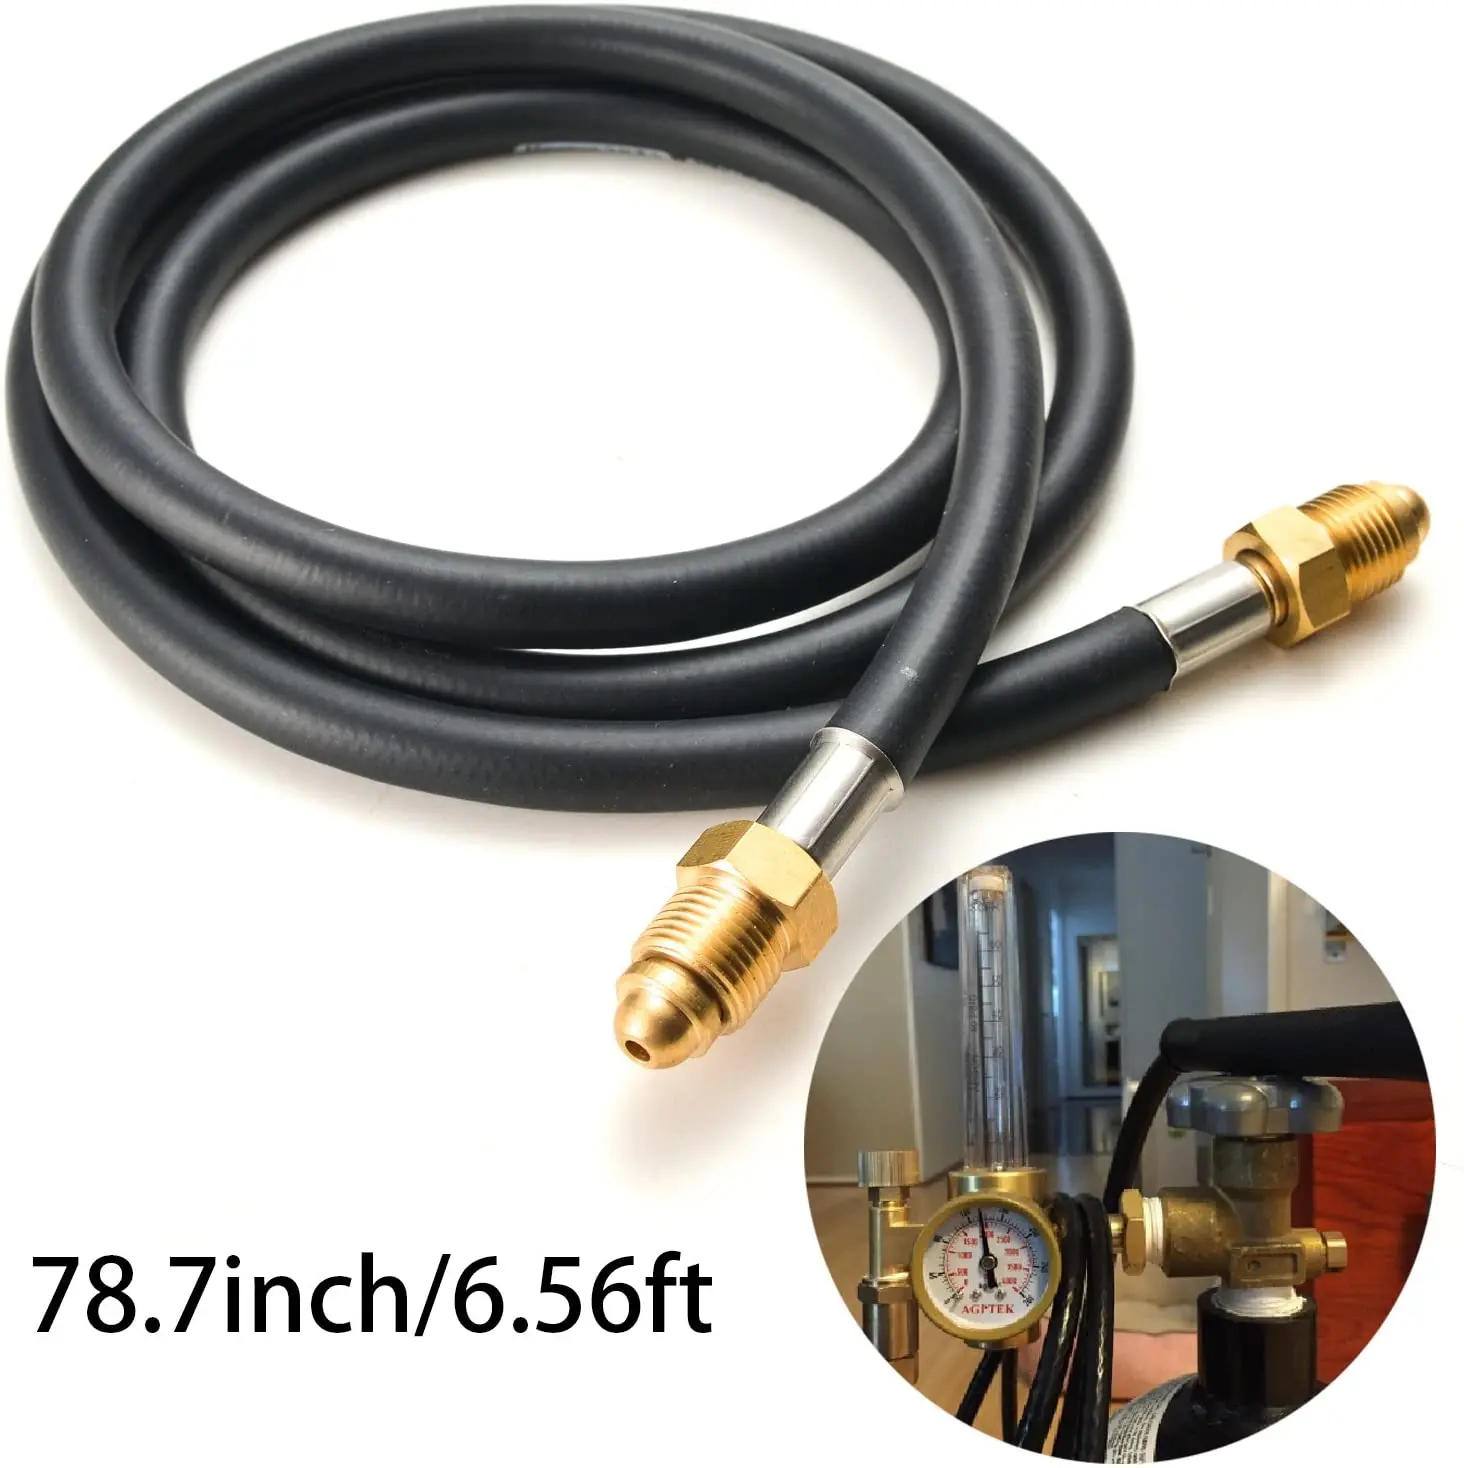 Mig Tig UNF5/8 72 inch/6ft,This Hose Is Standard UNF 5/8 with Inert Gas Fitting Haofst Argon CO2 Flow Meter Regulator Hose 